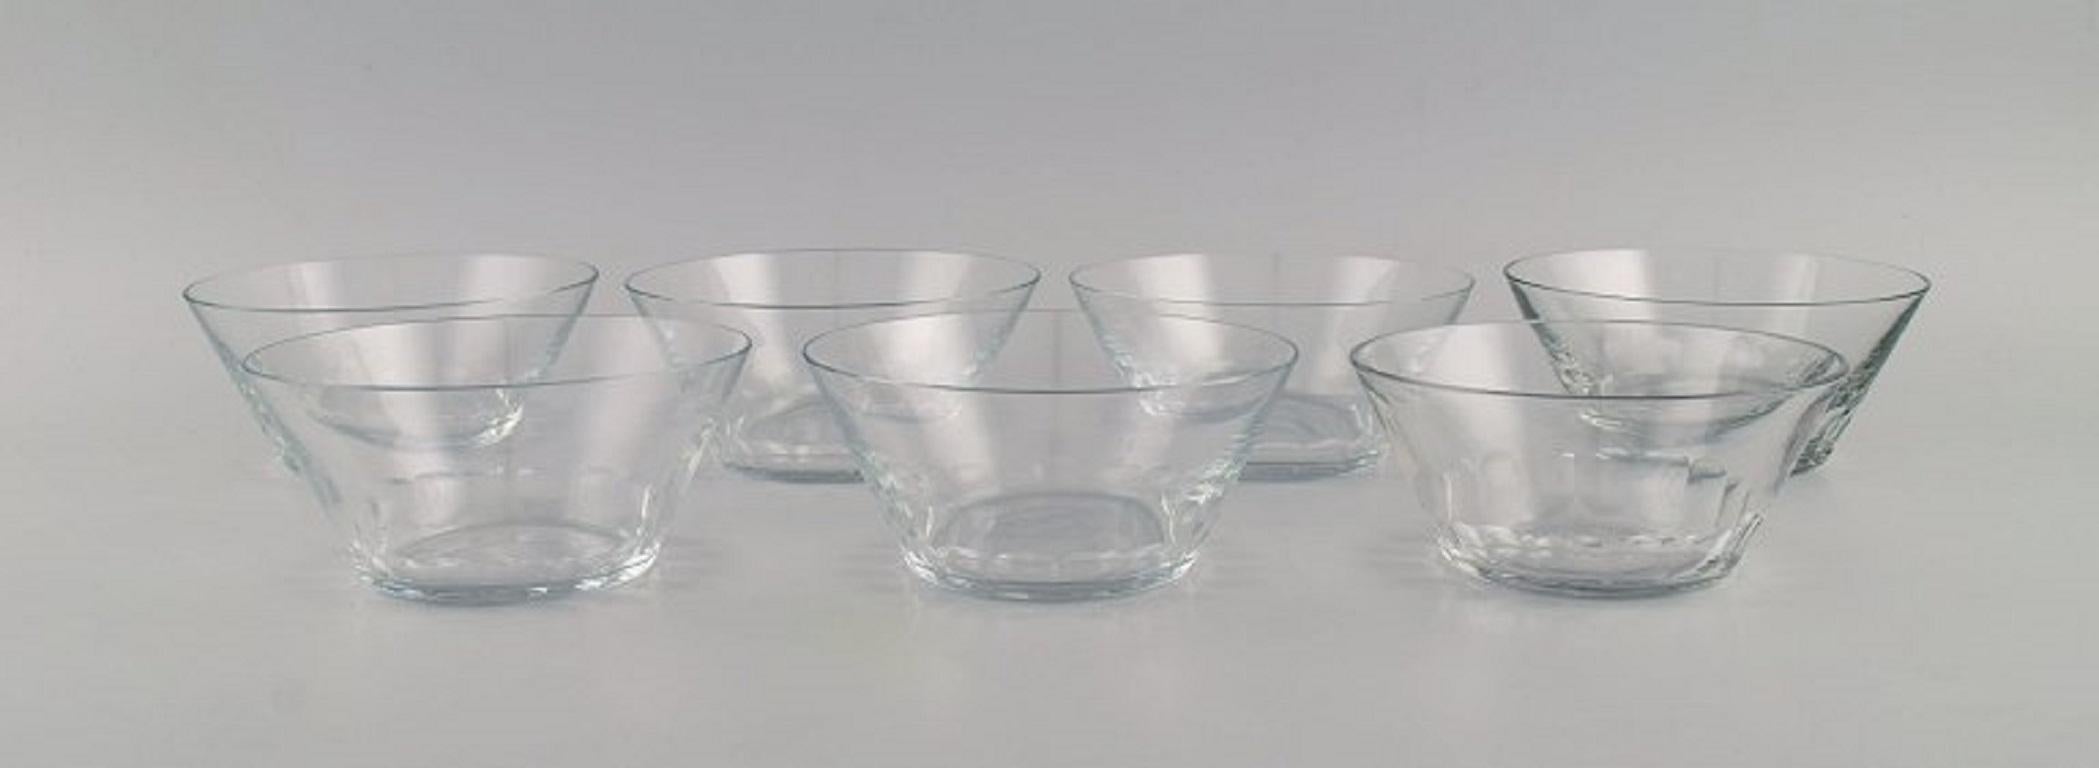 Baccarat, France. Seven rinsing bowls in clear mouth-blown crystal glass. Mid-20th century.
Measures: 12.5 x 5.3 cm.
In excellent condition.
Stamped.